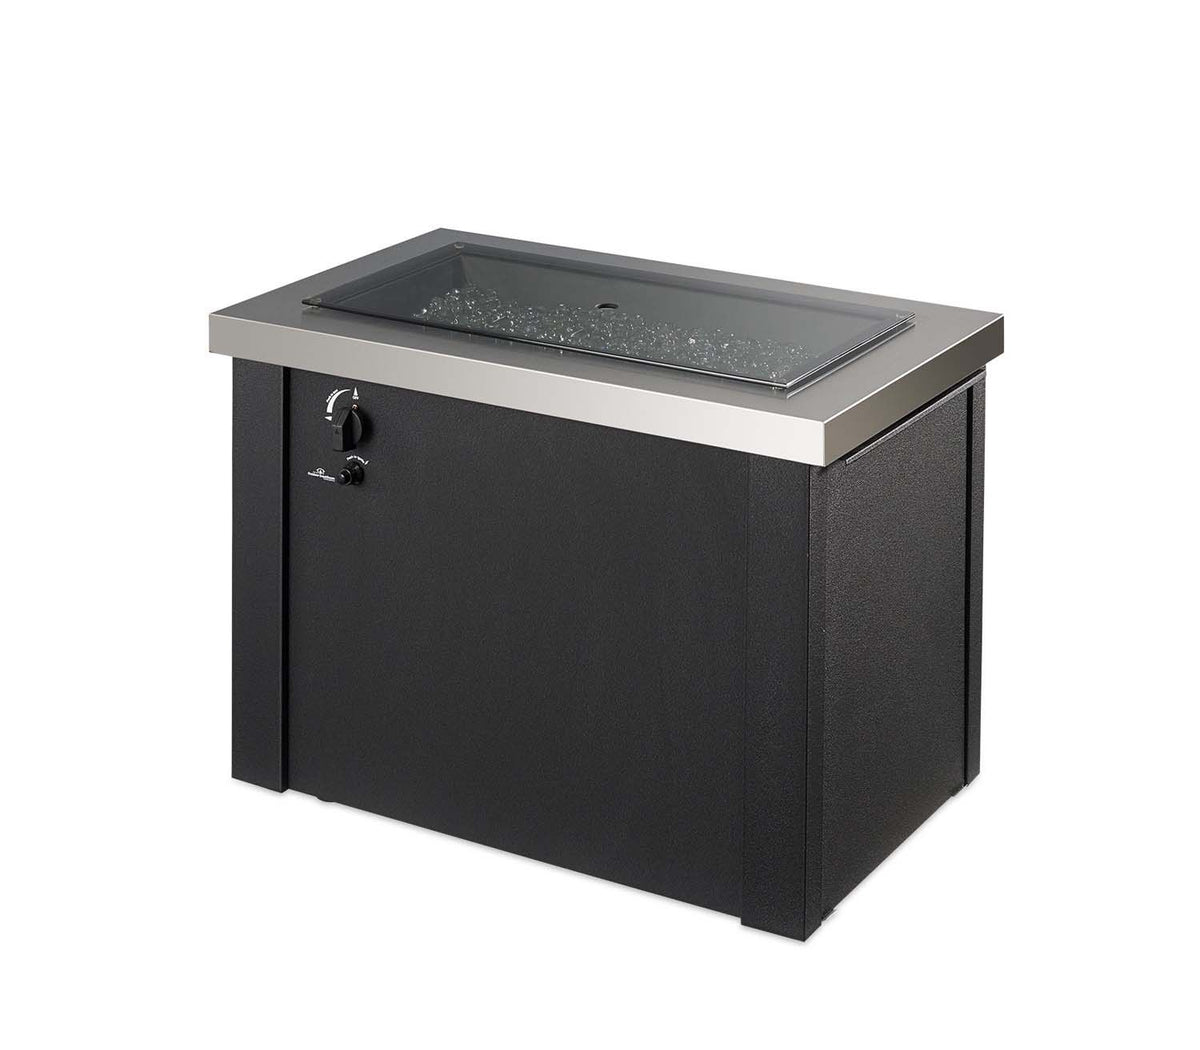 The Outdoor Greatroom Stainless Steel Providence Rectangle Fire Table